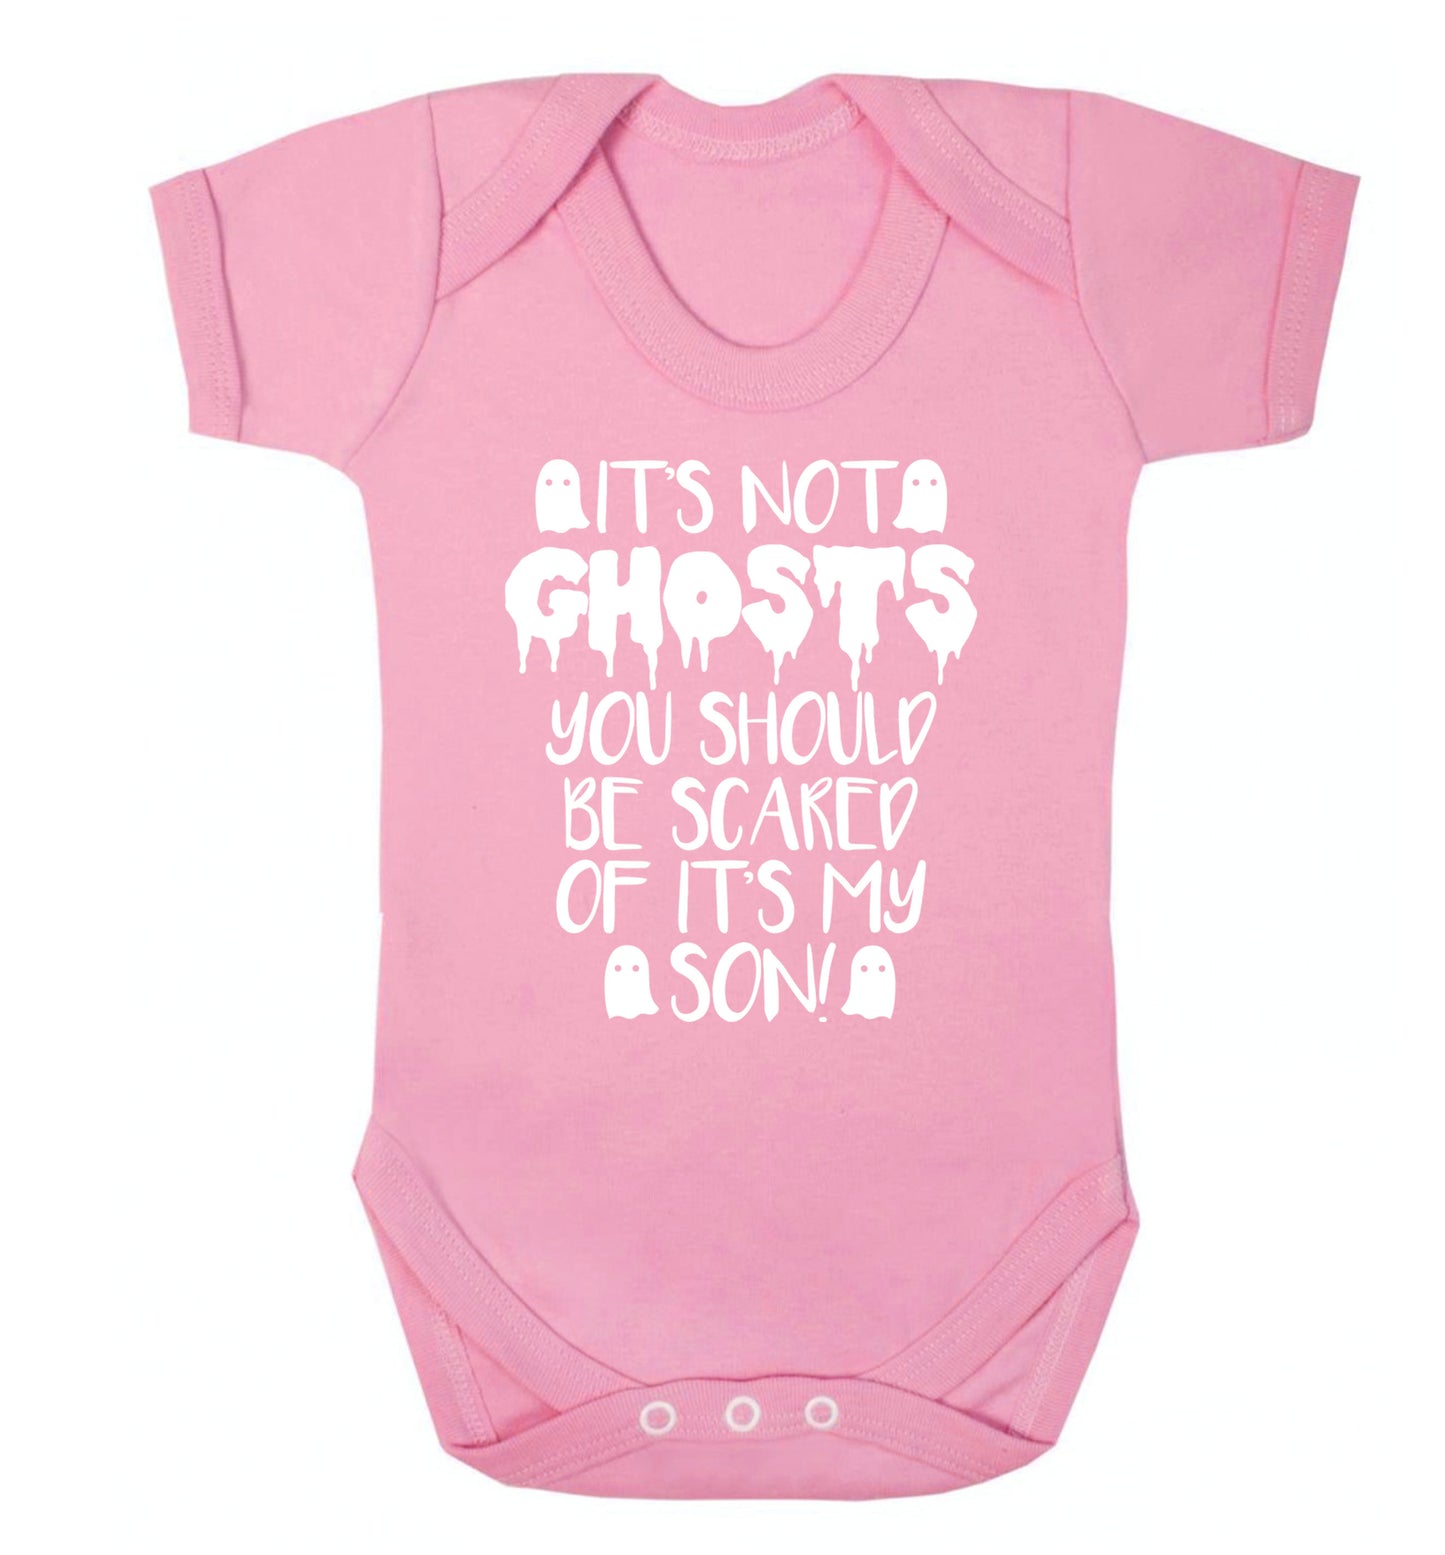 It's not ghosts you should be scared of it's my son! Baby Vest pale pink 18-24 months